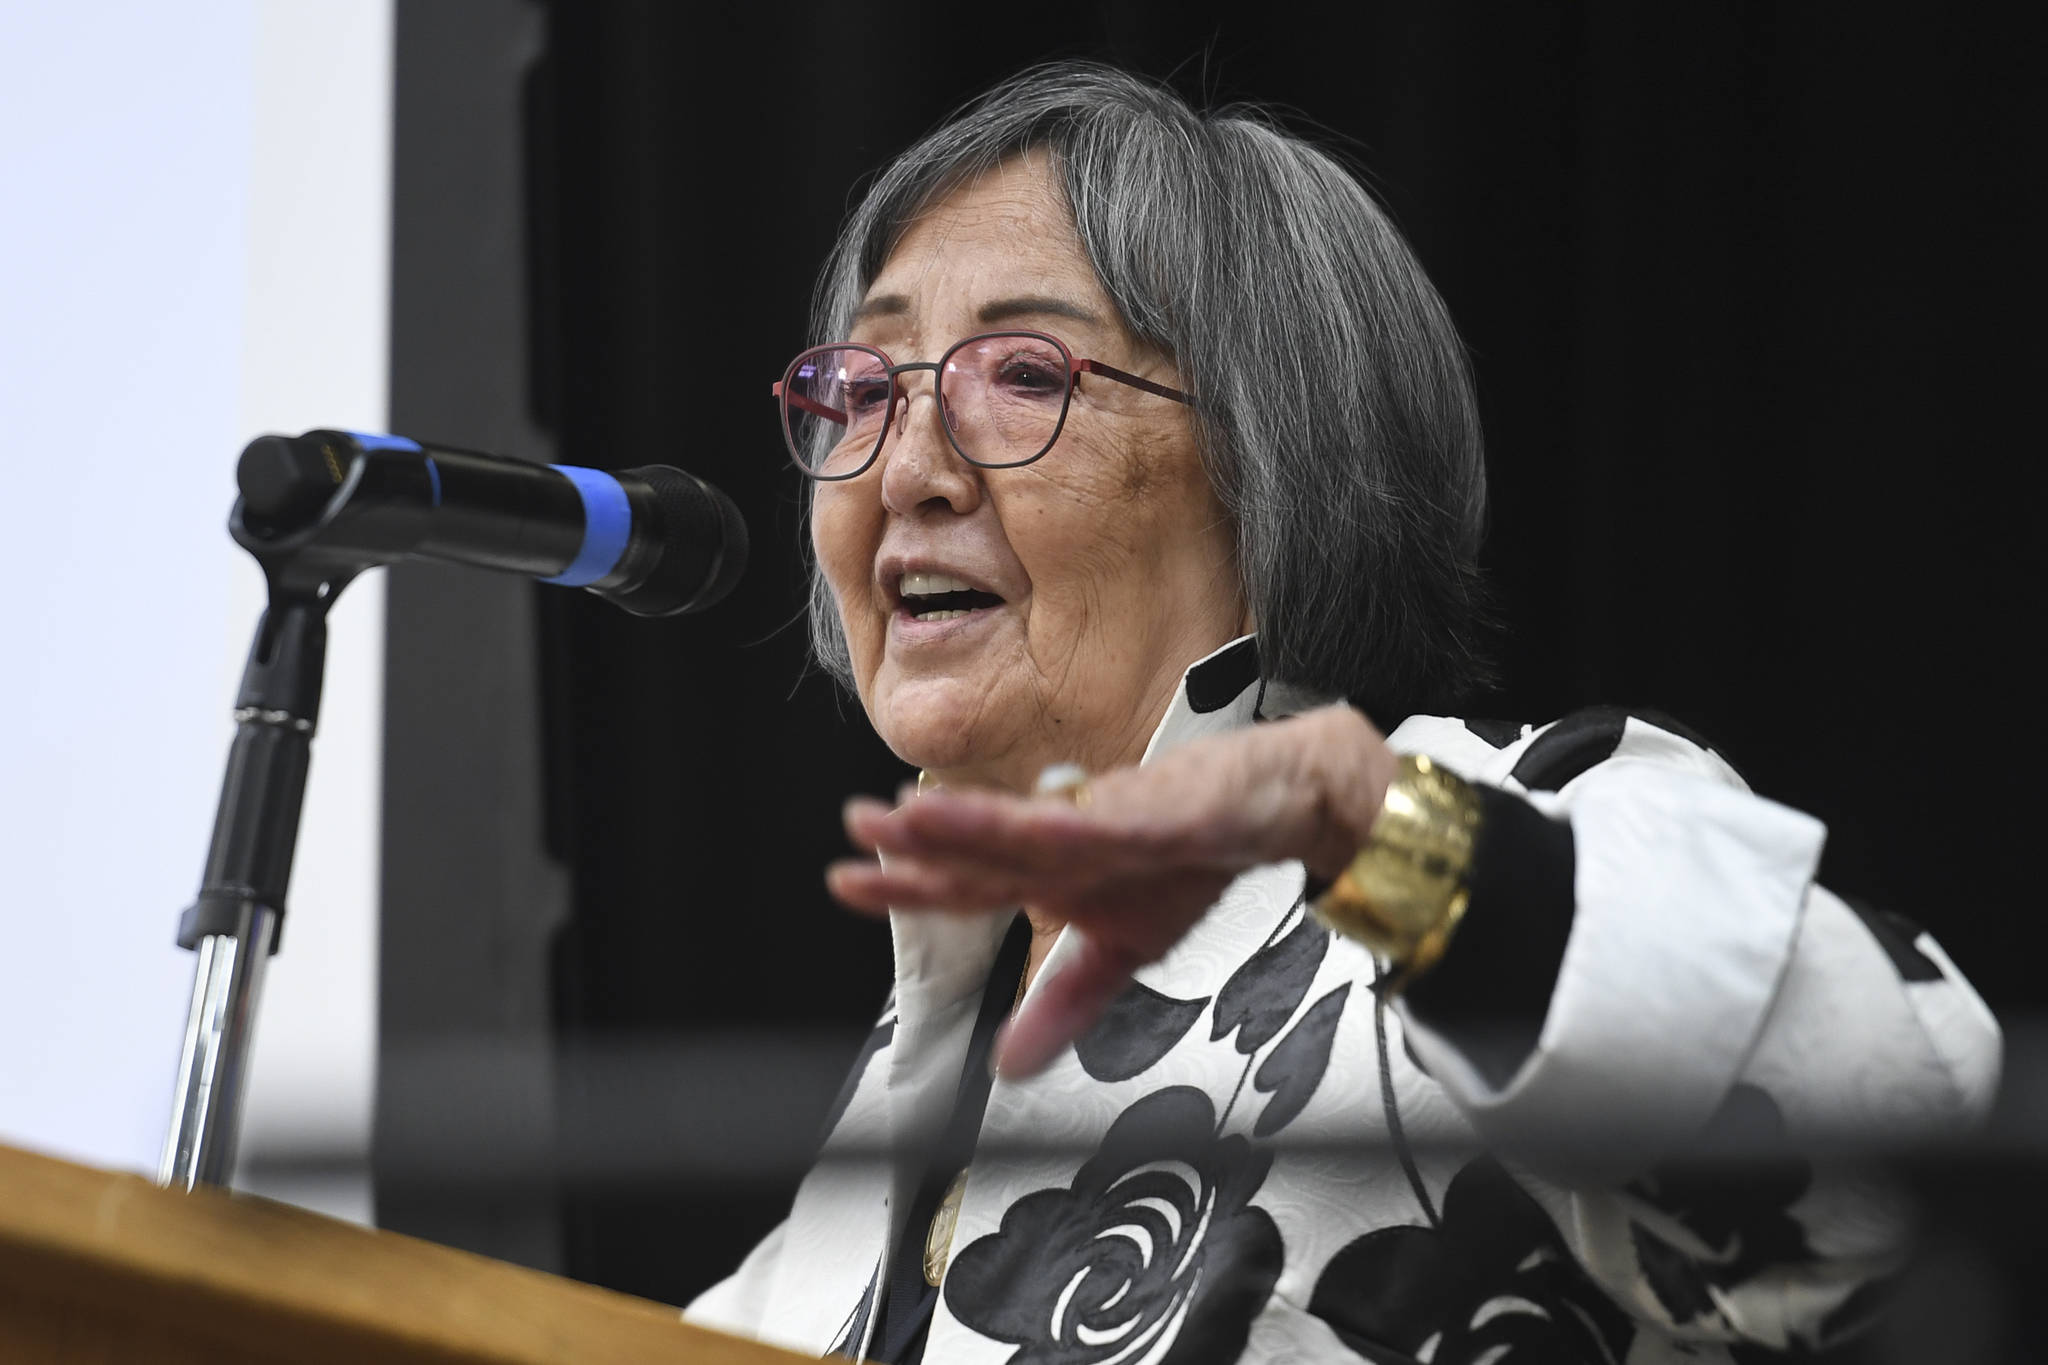 Rosita Worl, president of Sealaska Heritage Institute, gives a presentation at the Sharing Our Knowledge event in September 2019. (Michael Penn | Juneau Empire File)